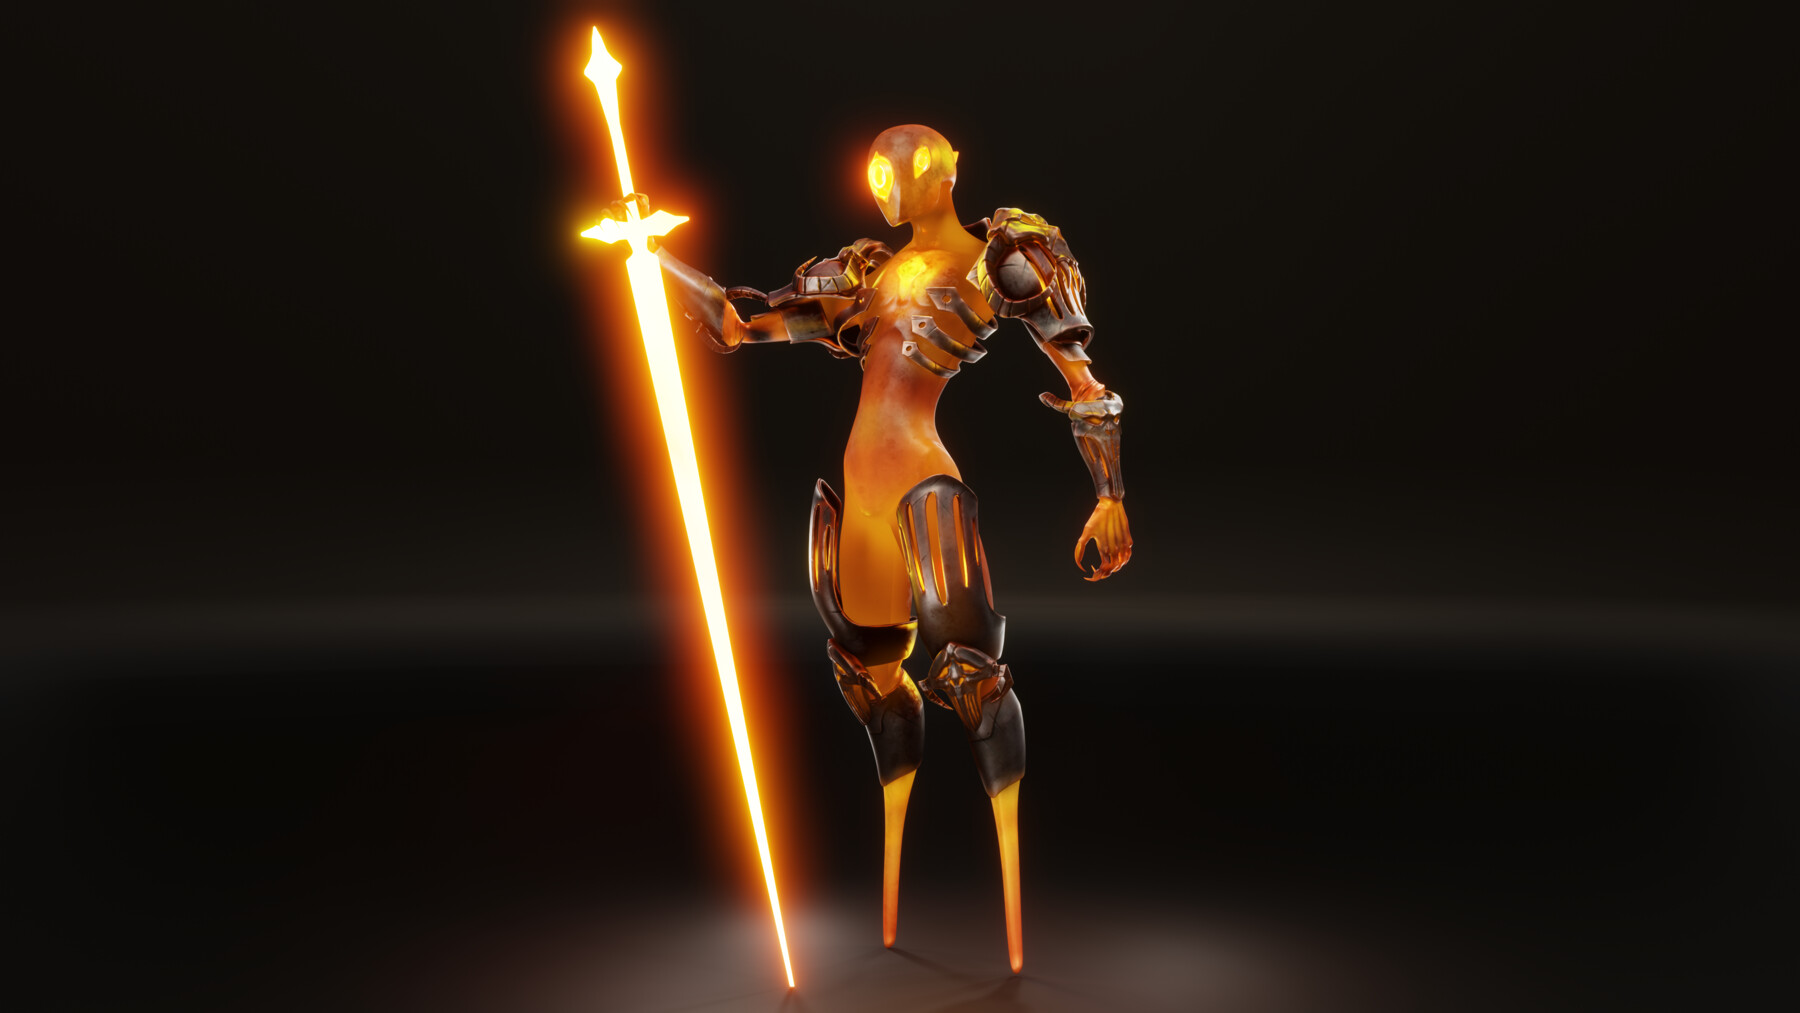 ArtStation - Free - 3D Character game ready model - Dark fire knight -  Tpose ready for rigging. | Game Assets